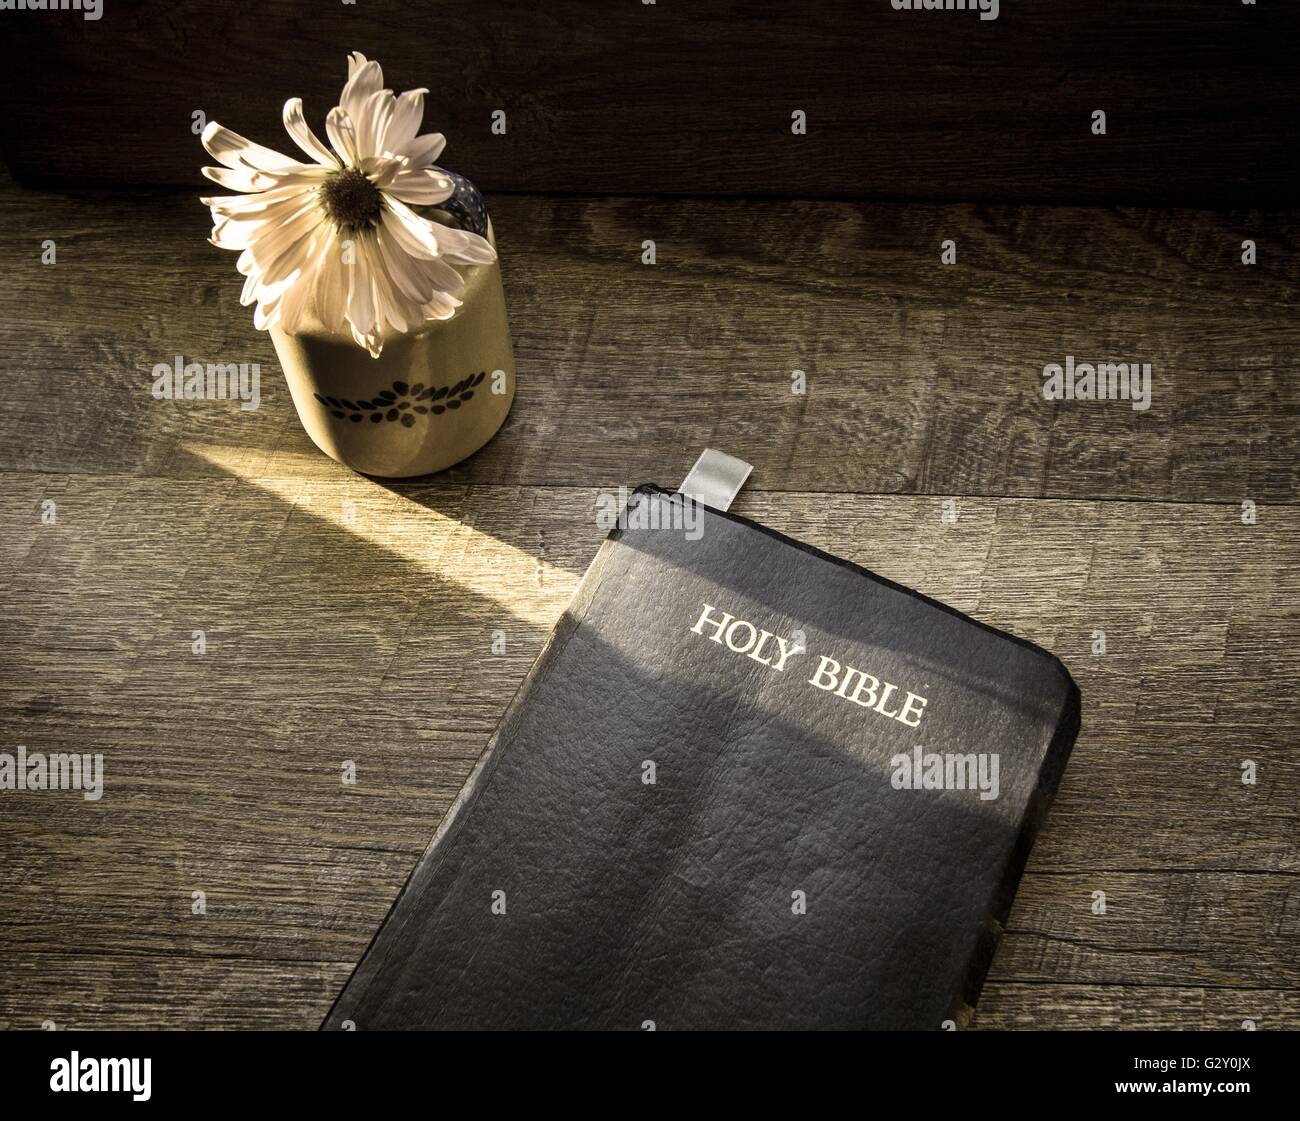 Bible Study. Morning light illuminates a King James Bible on a rustic wooden background with single flower. Stock Photo